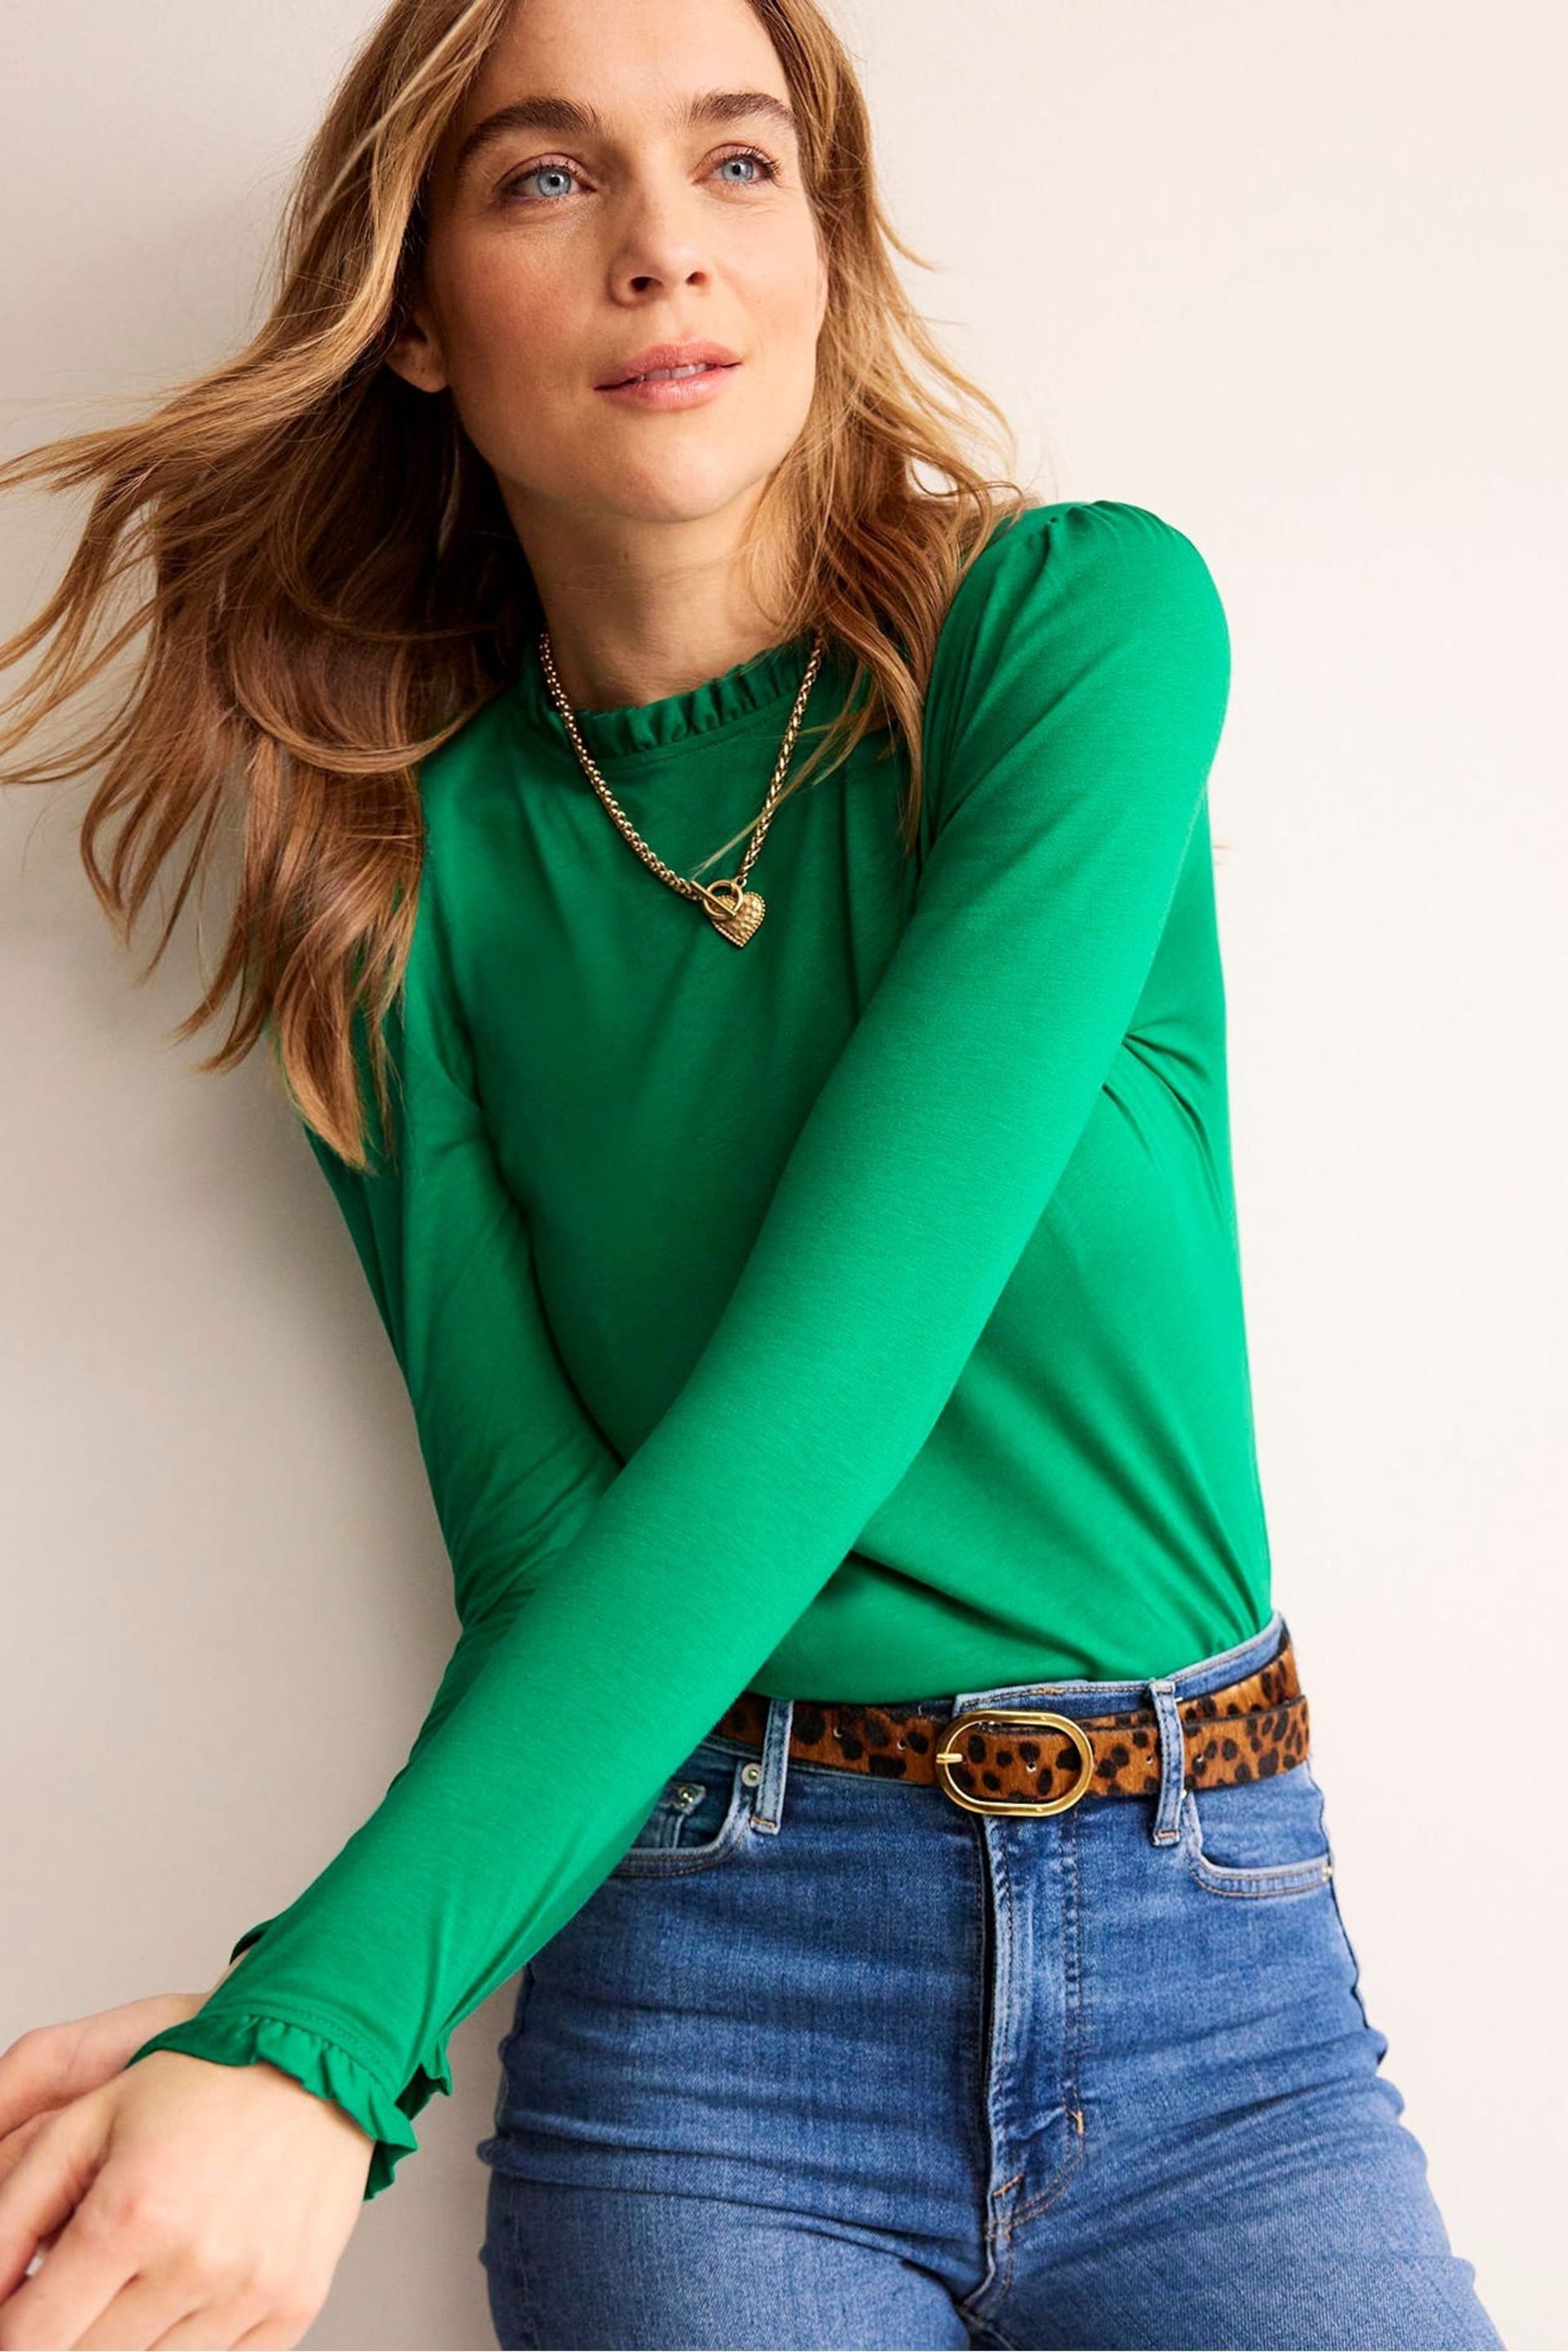 Boden Dark Green Supersoft Frill Detail Top - Image 1 of 5